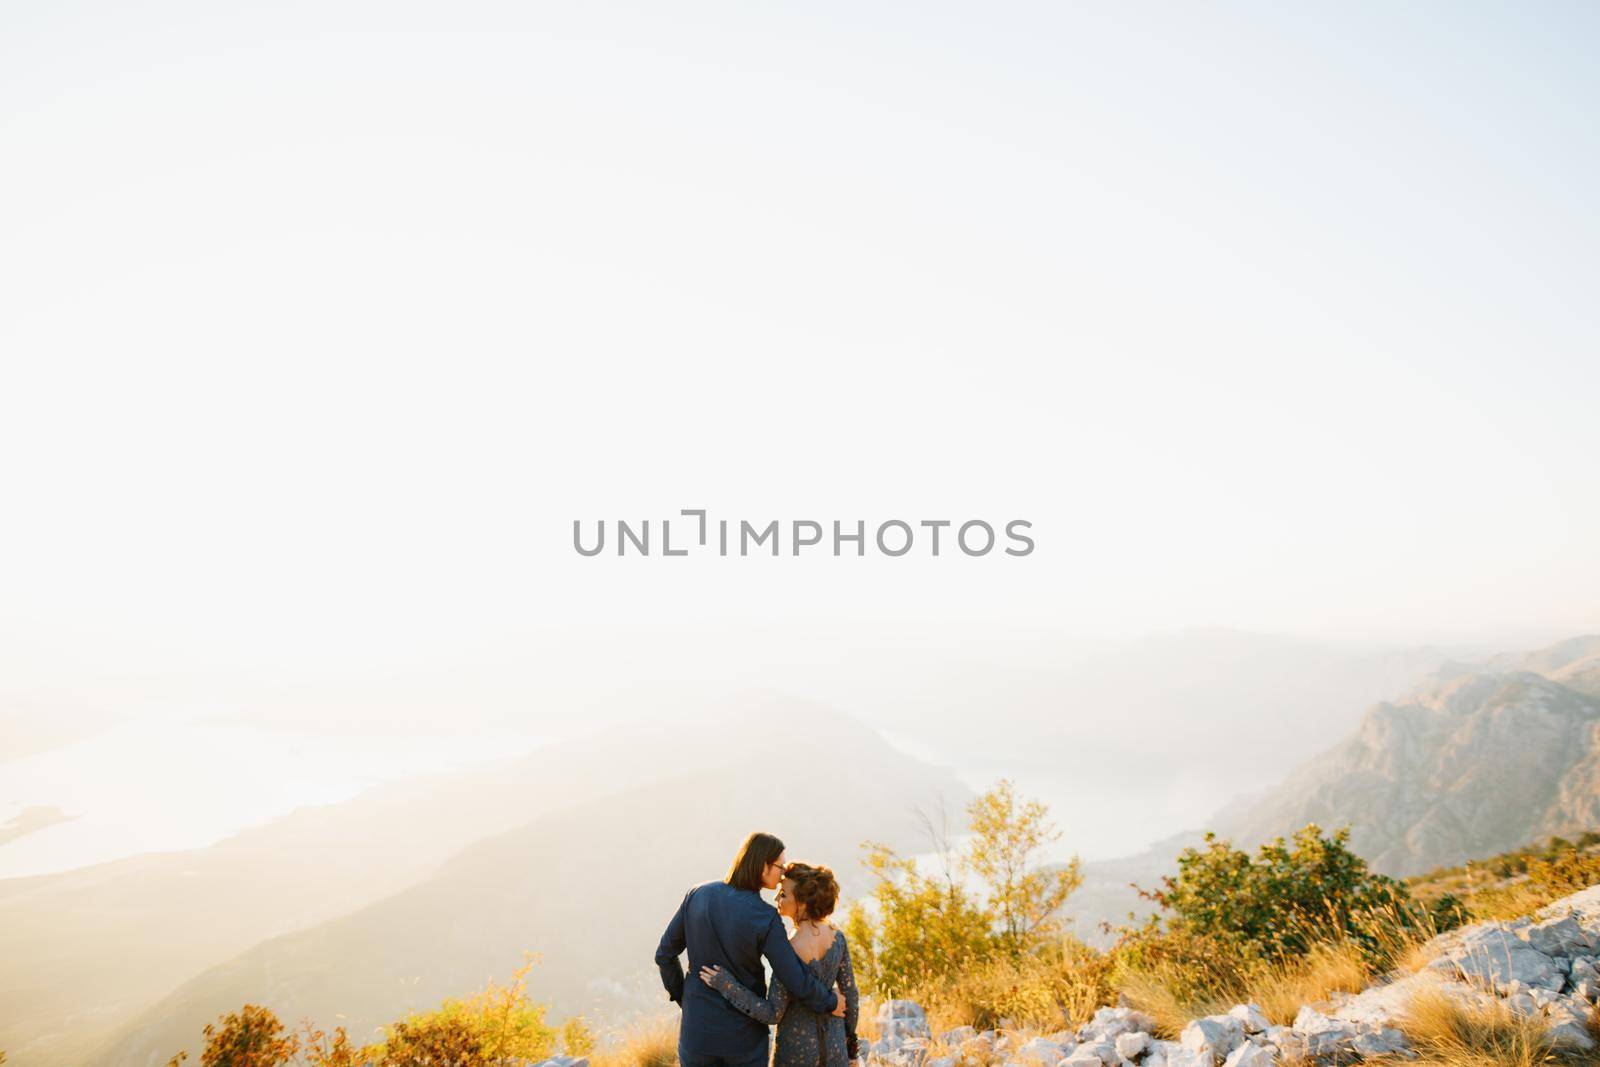 The bride and groom embracing and kissing on the Lovcen mountain behind them opens a view of the Bay of Kotor, back view by Nadtochiy